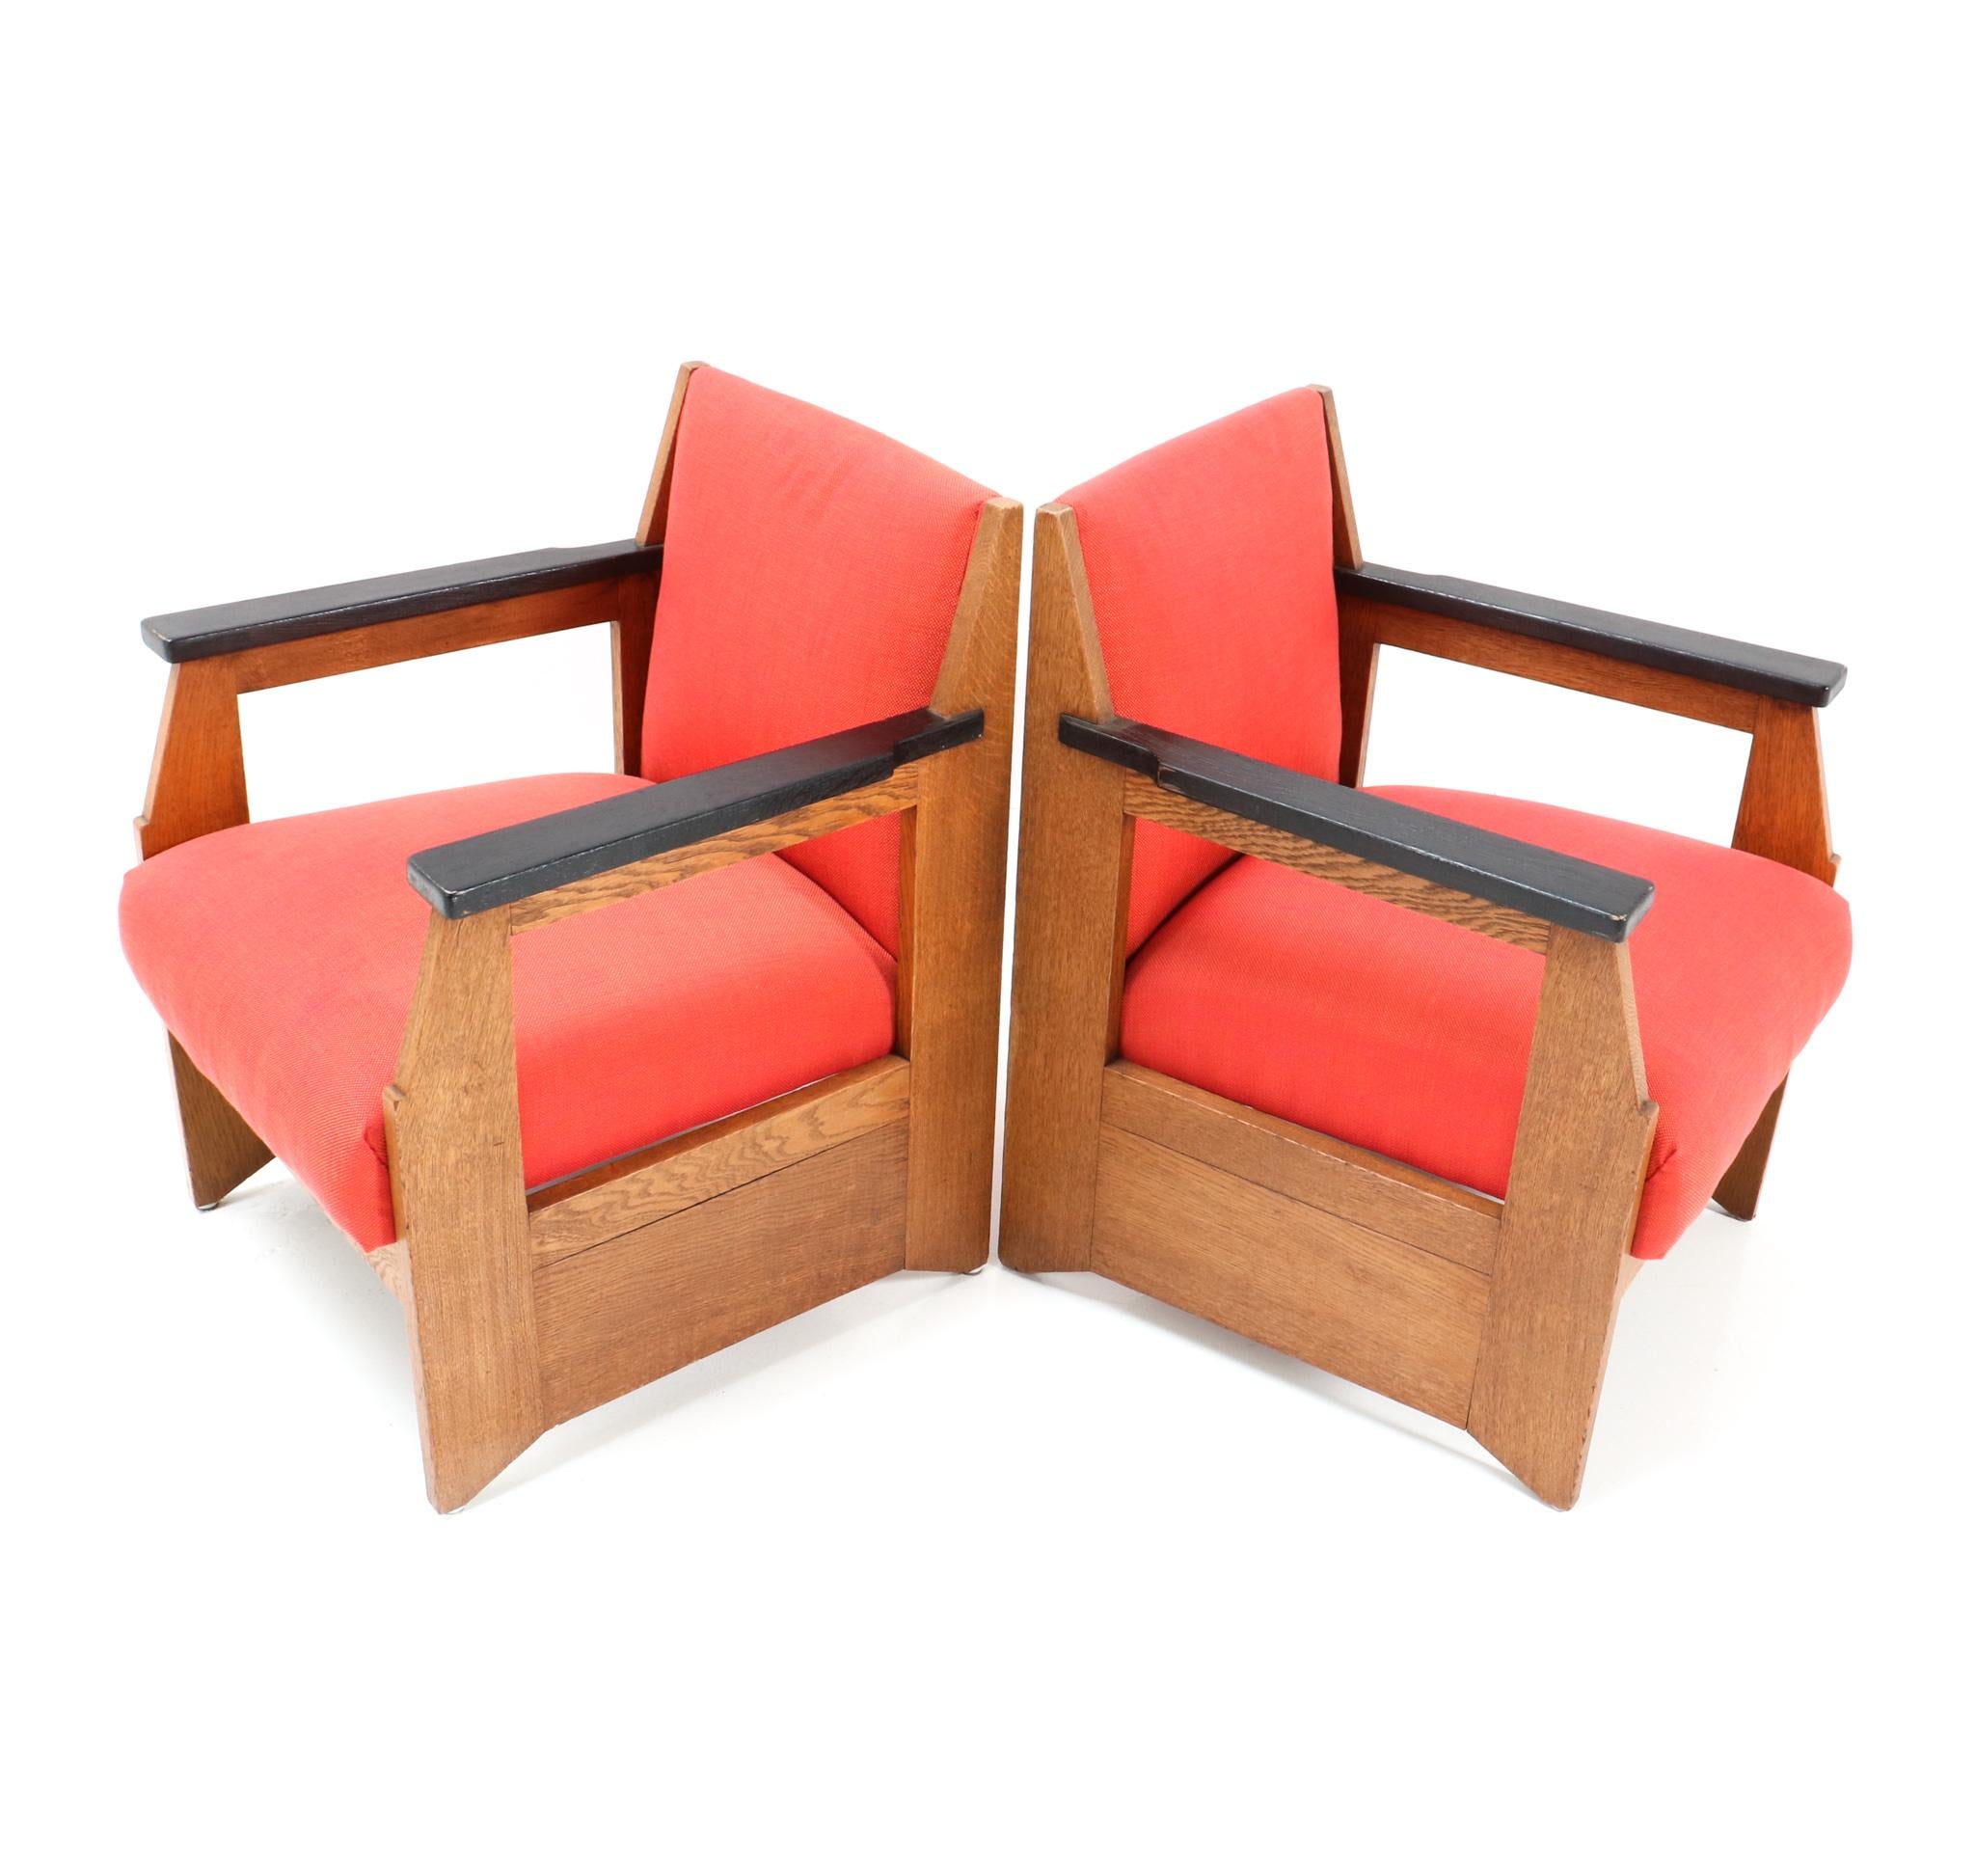 Early 20th Century Pair of Oak Art Deco Modernist Easy Chairs by Hendrik Wouda for Pander, 1924 For Sale